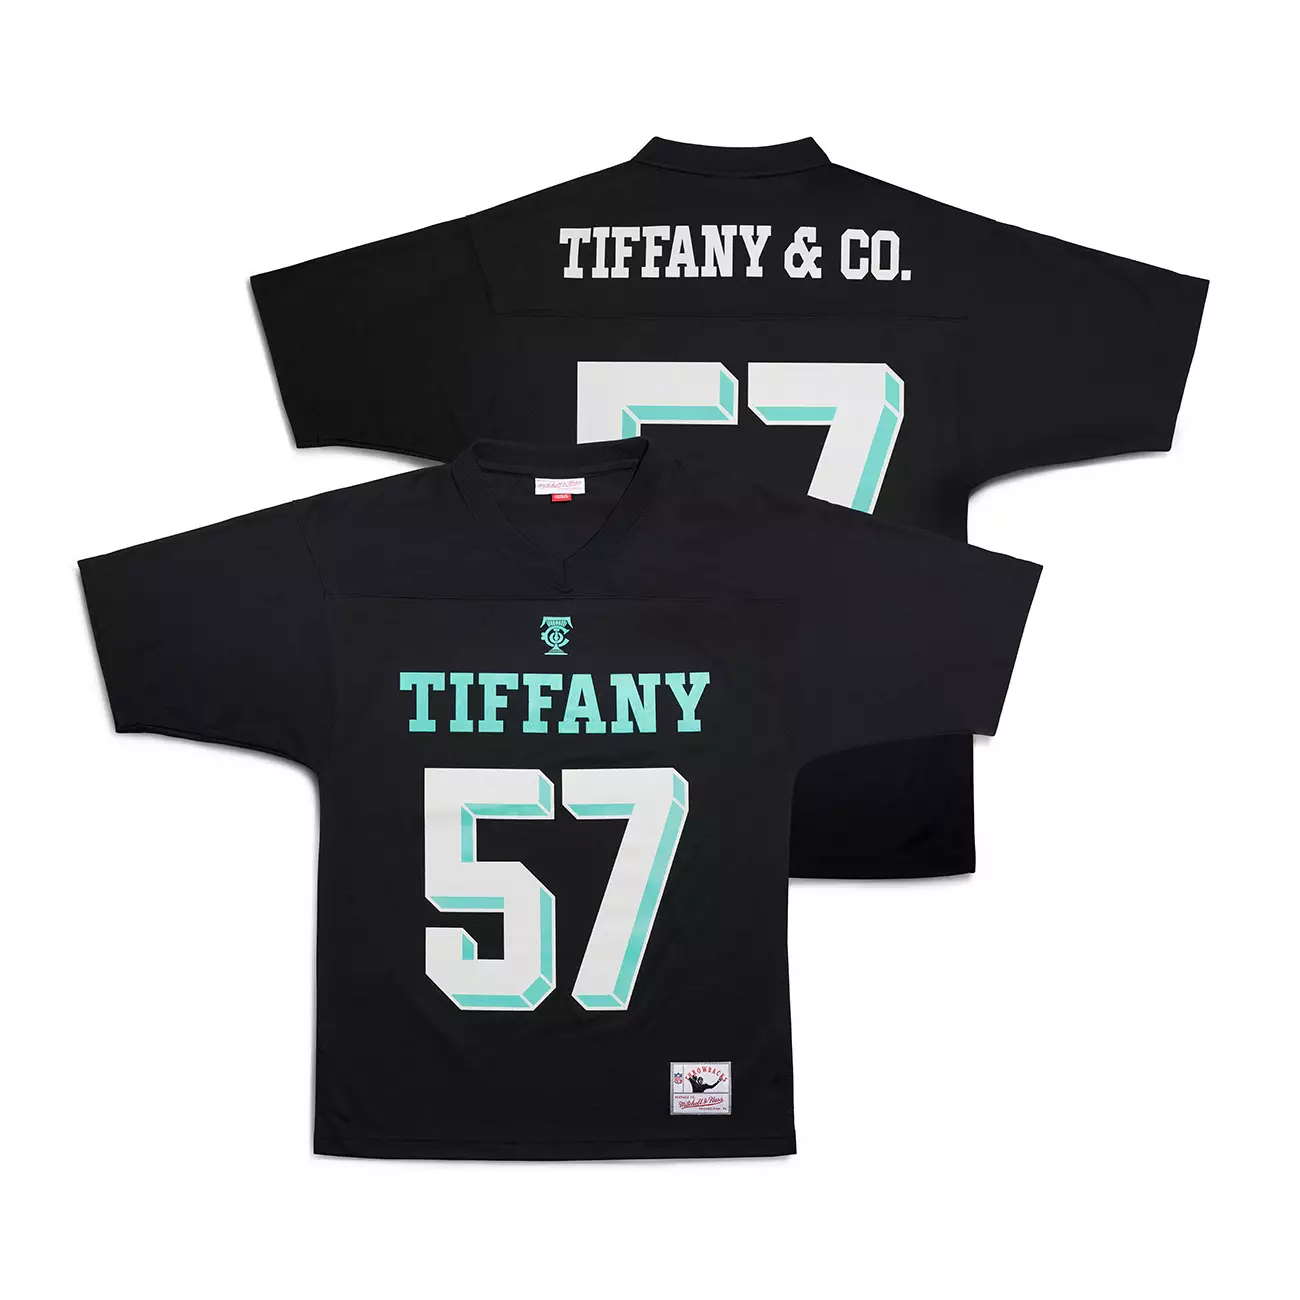 Tiffany & Co. expands influence into fashion with Mitchell & Ness collaboration on Super Bowl jersey